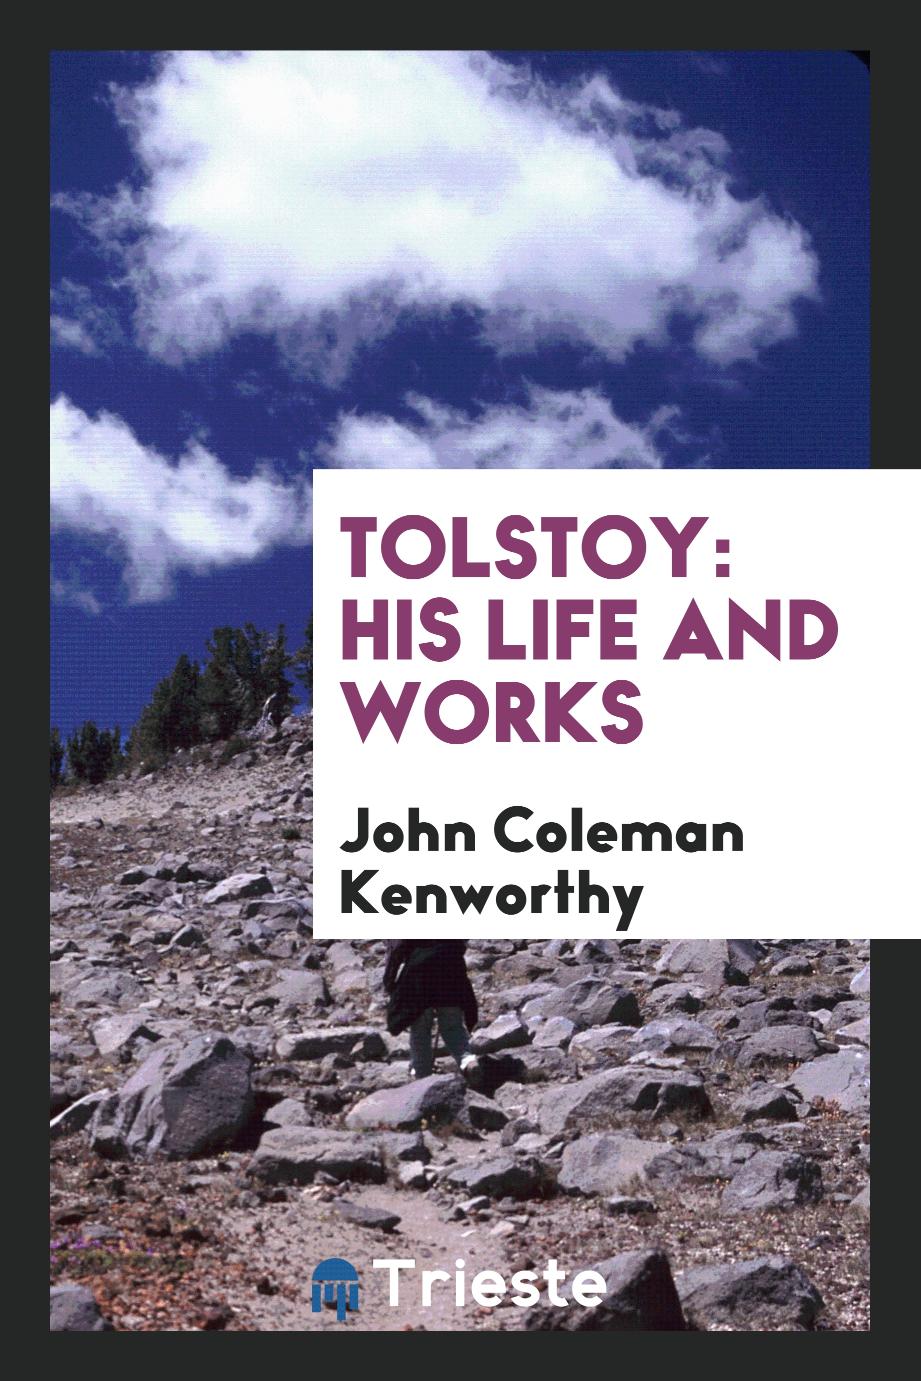 Tolstoy: his life and works